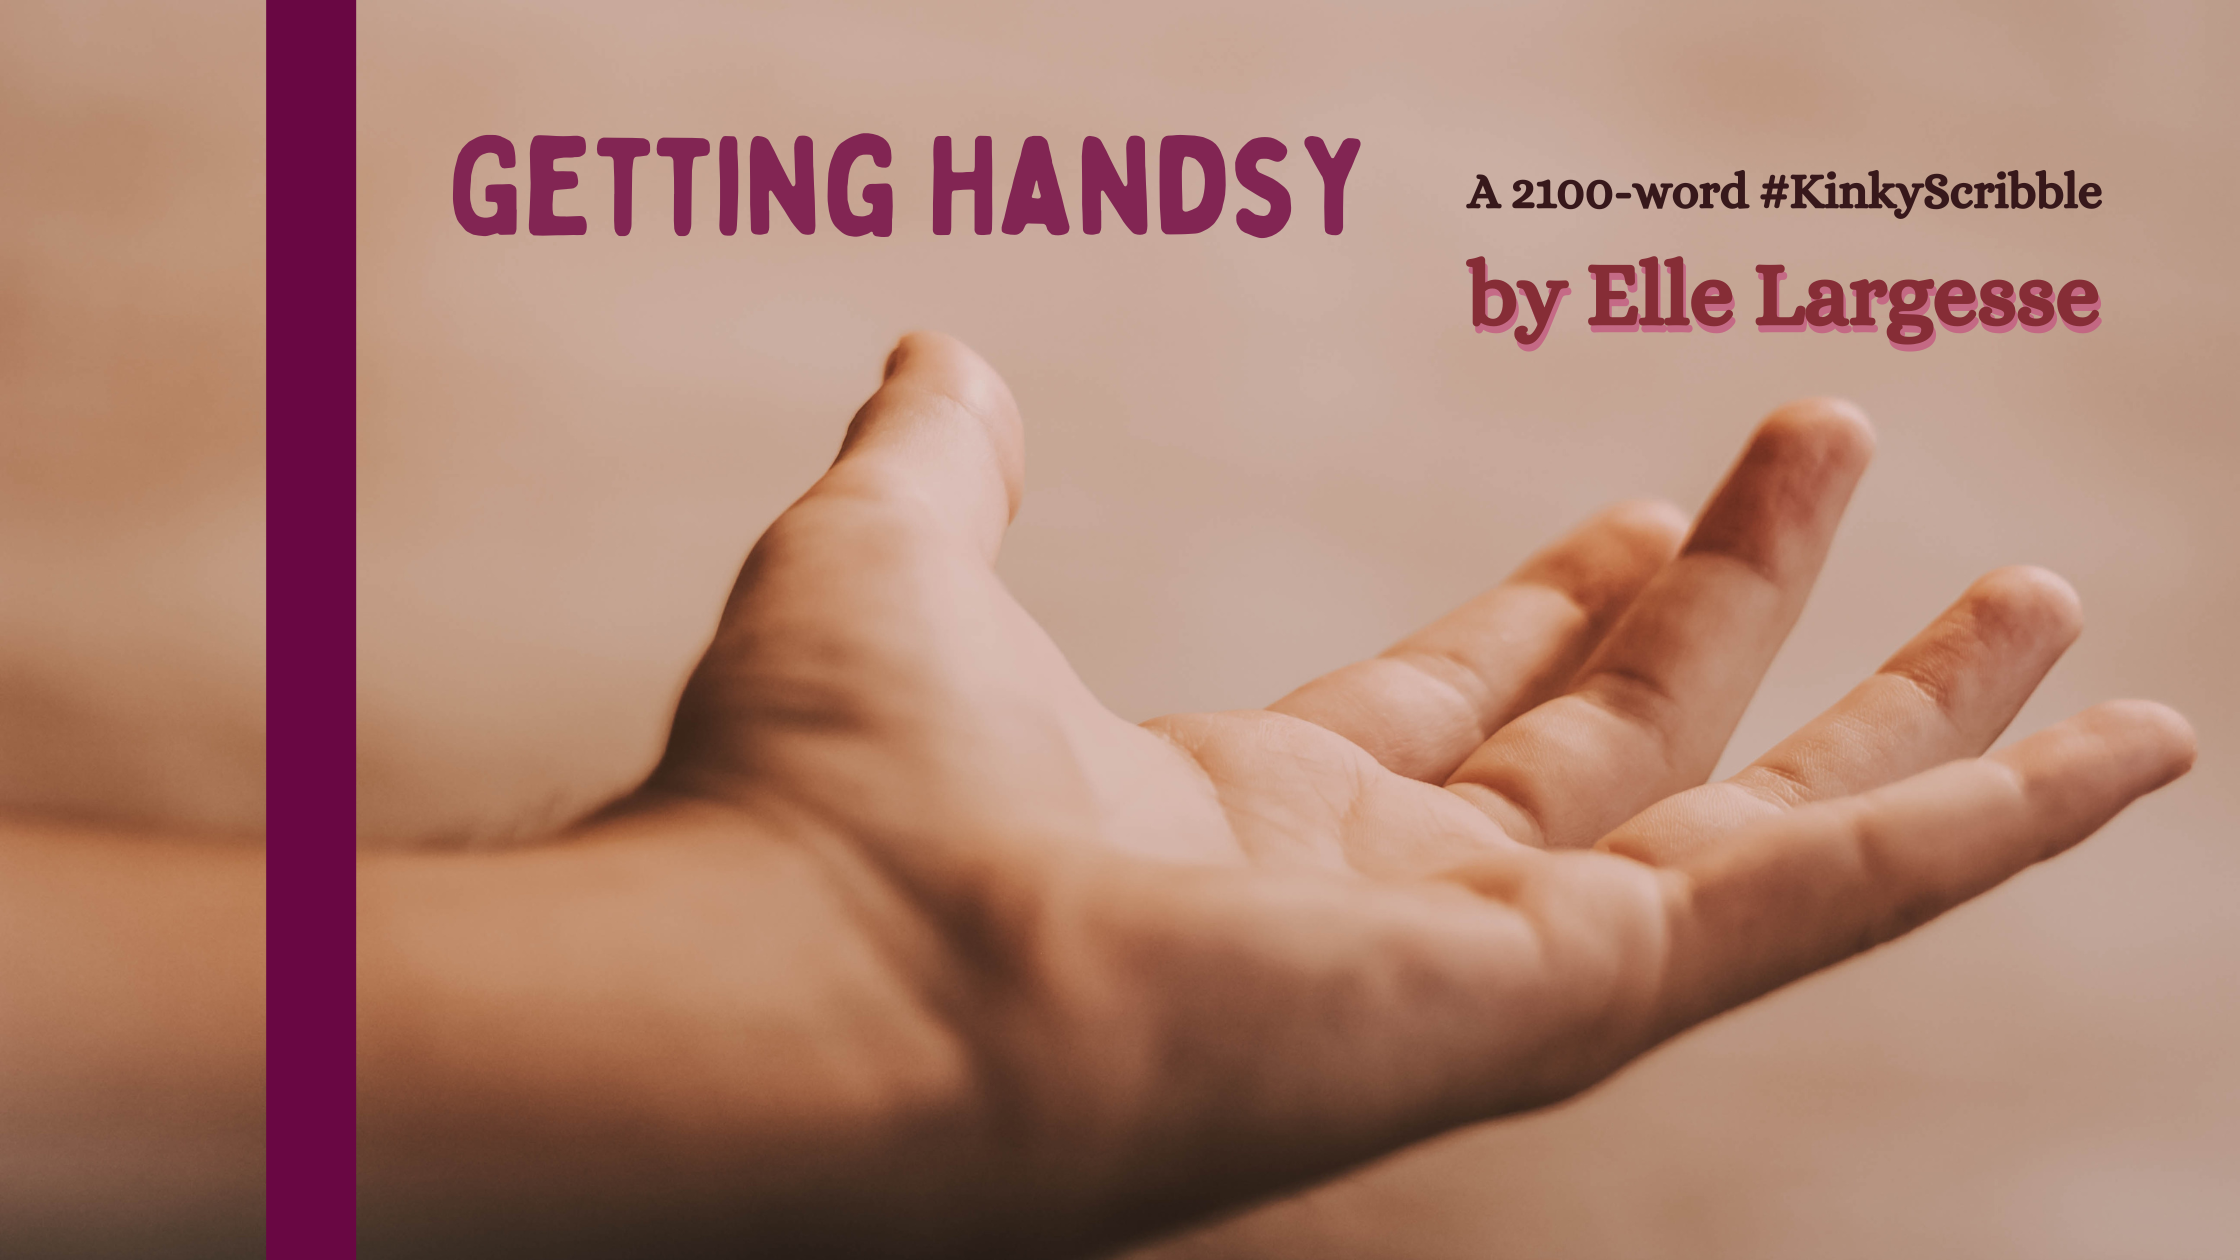 A photo of a hand with light brown skin reaching out, palm up, with the middle finger slightly raised. Text reads "Getting Handsy, a 2100-word #Kinky Scribble by Elle Largesse.